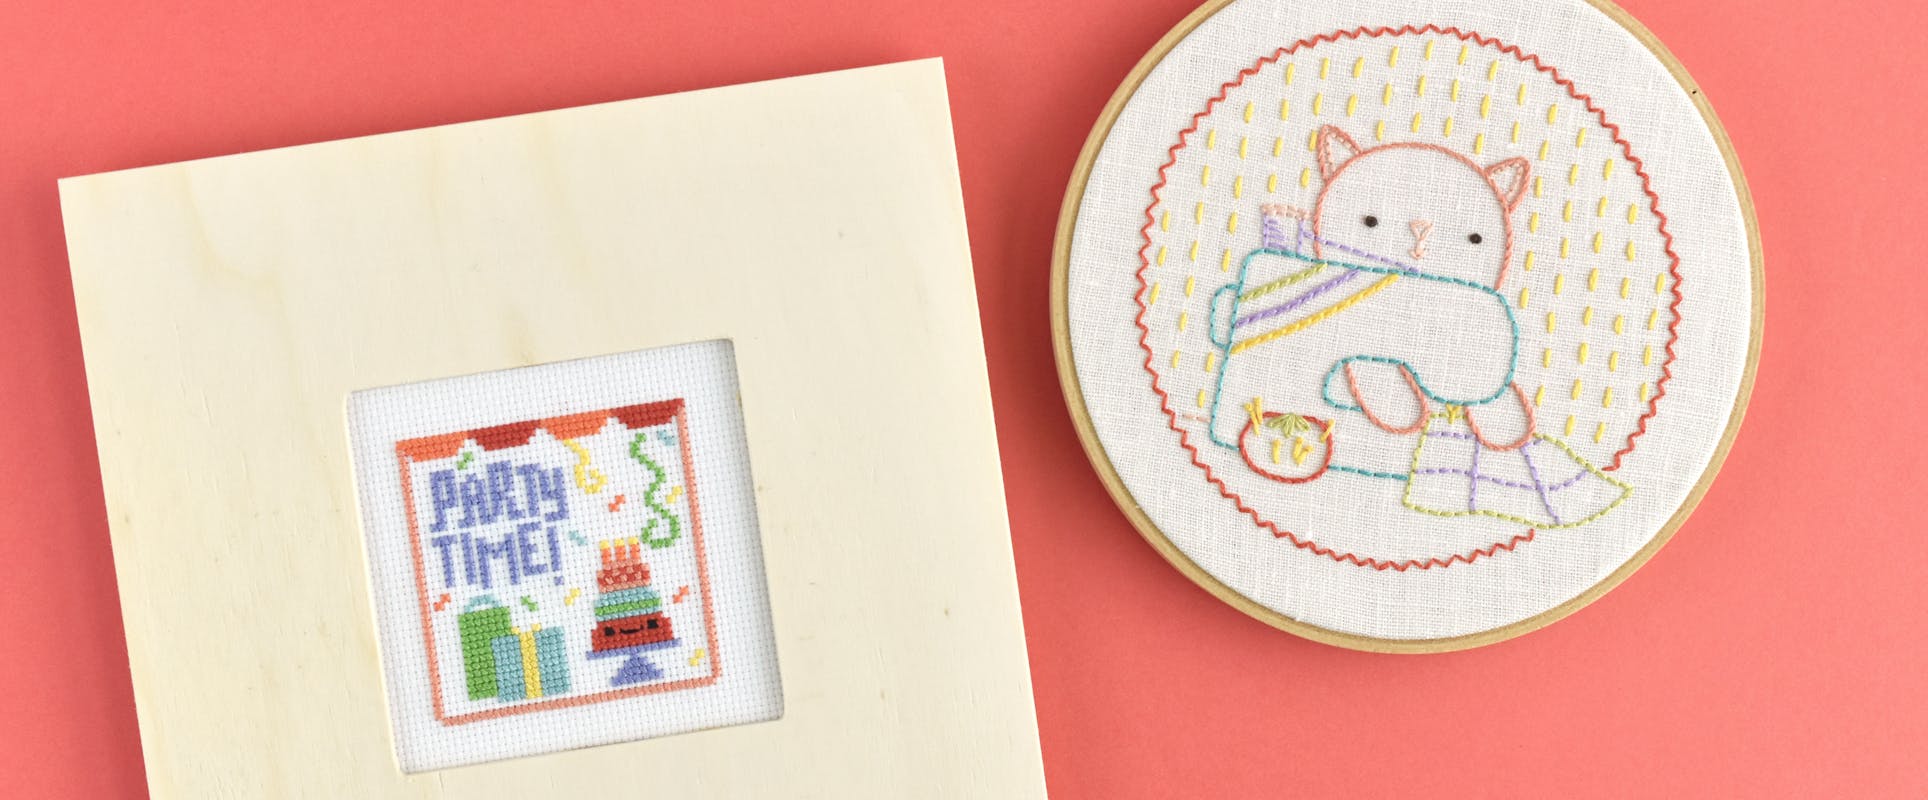 How to Frame Cross Stitch and Embroidery Using Sticky Board – Needle Work